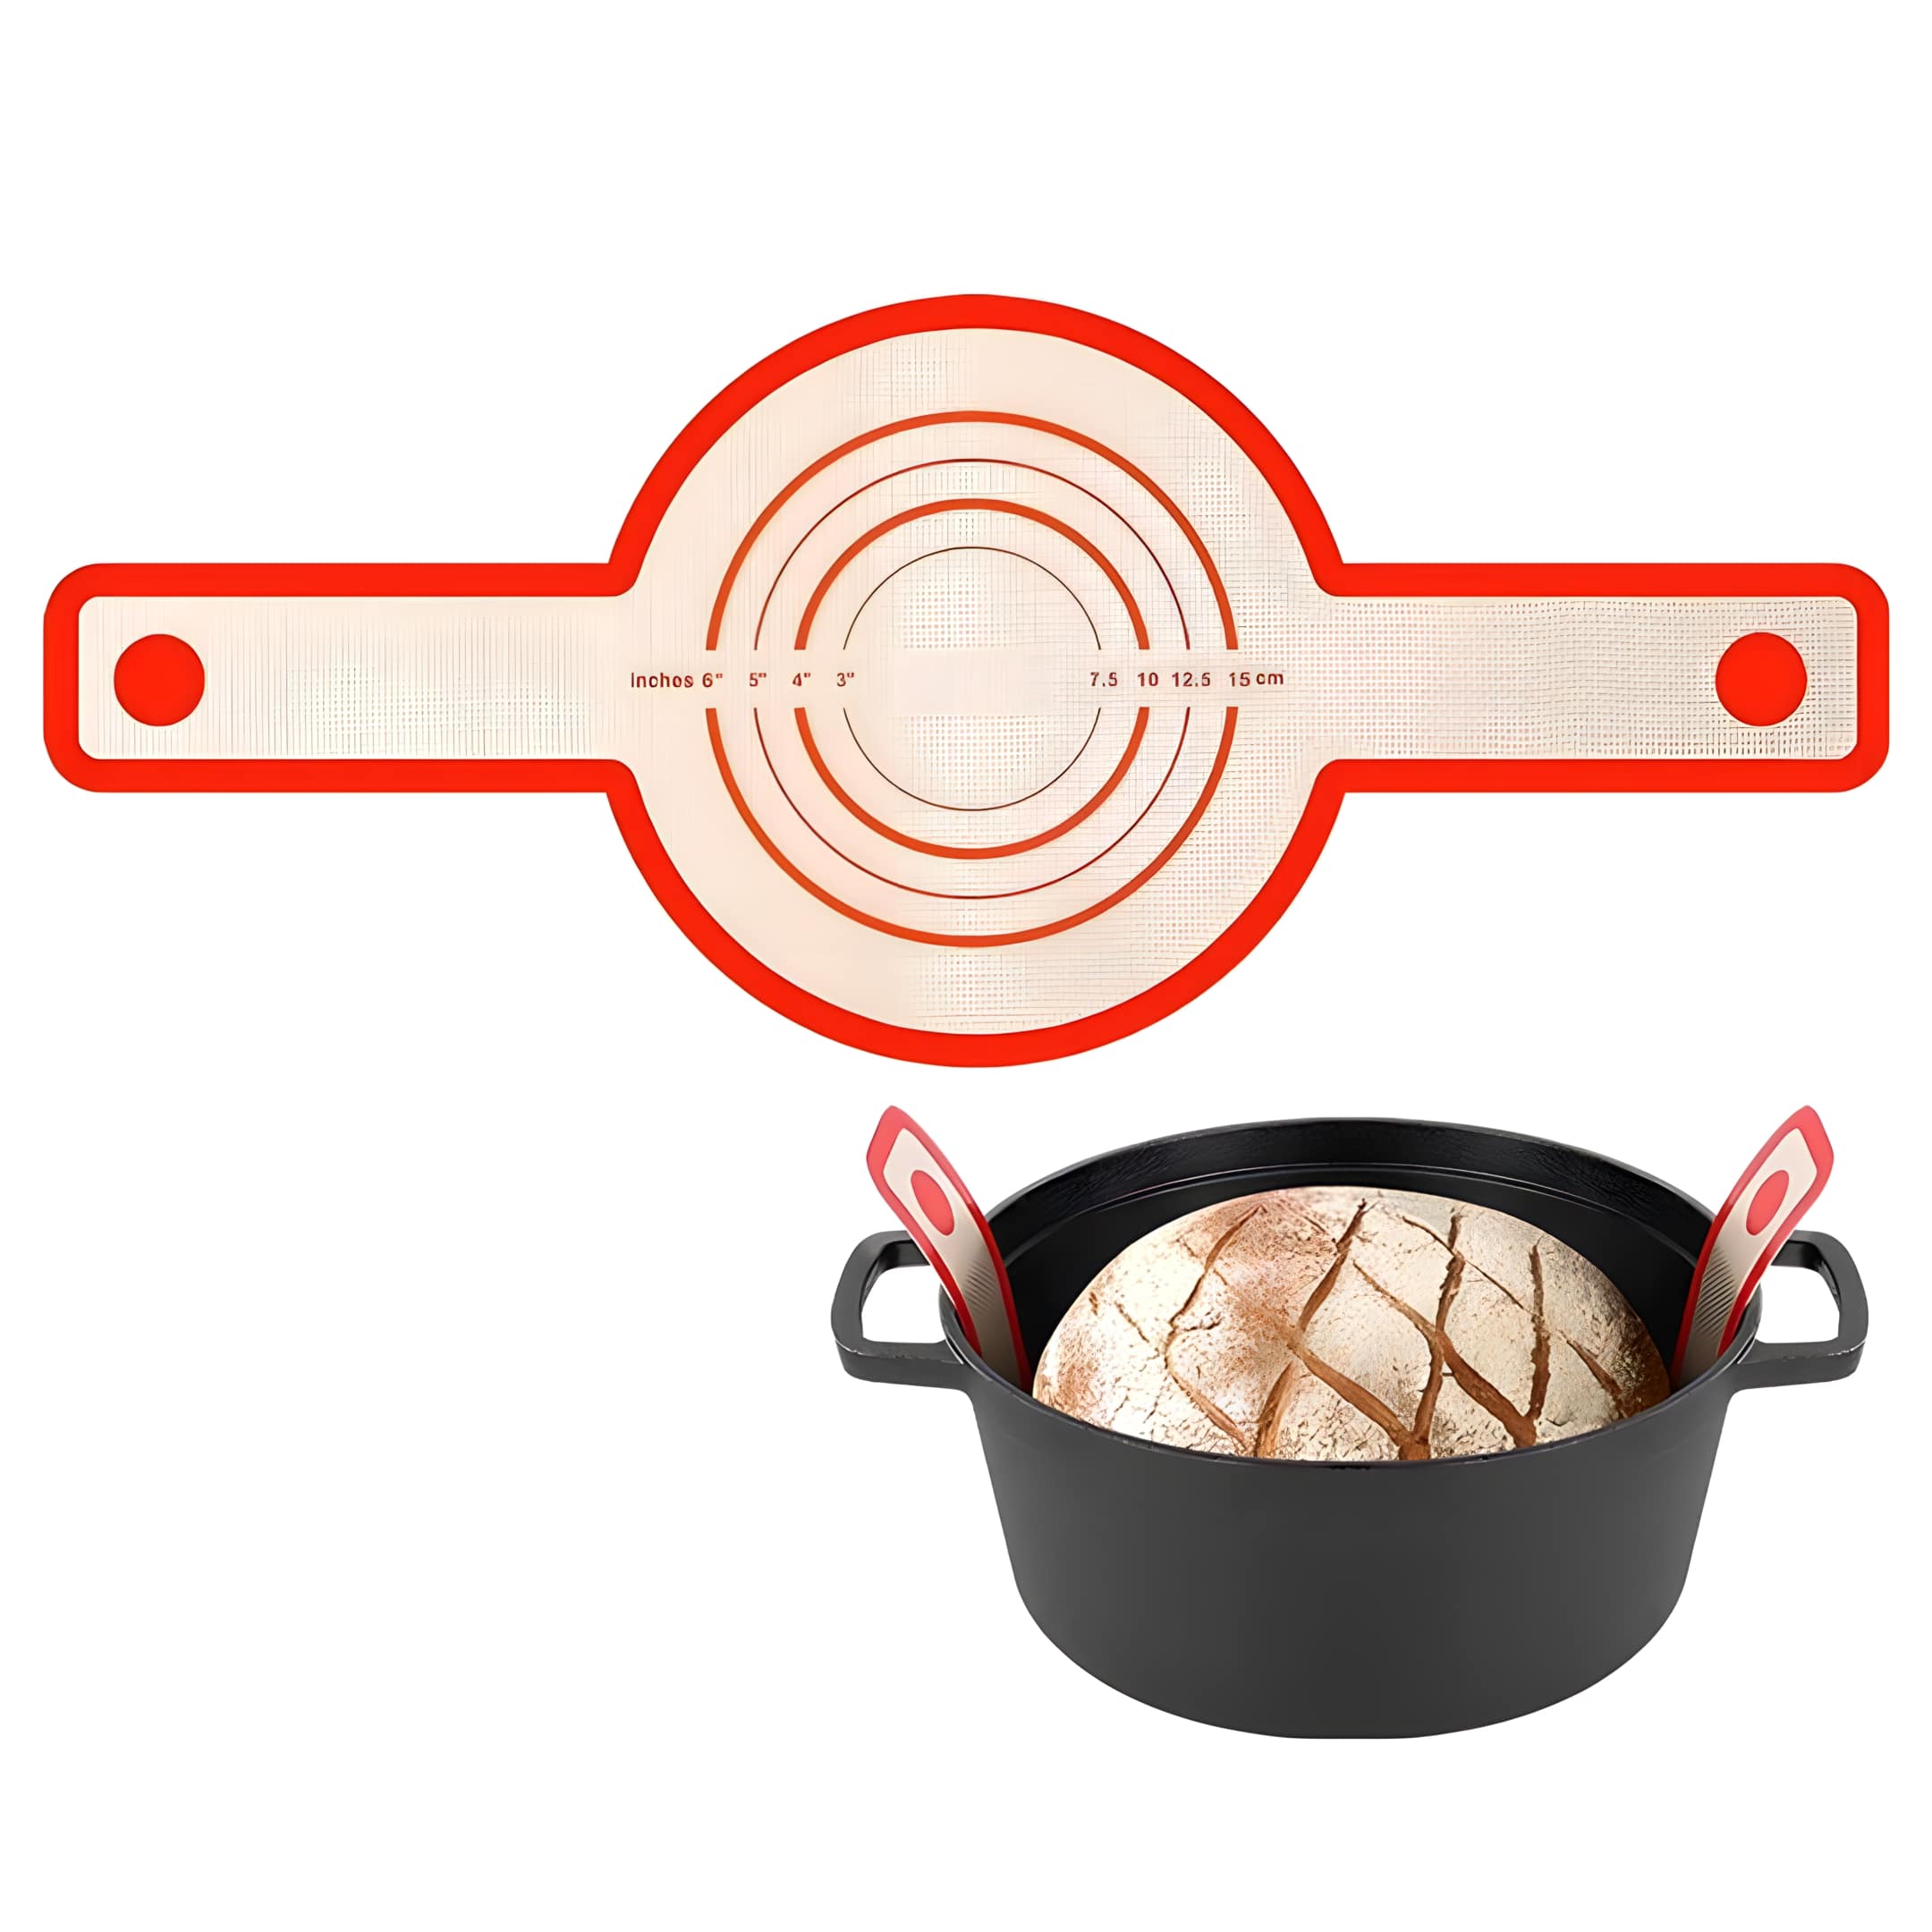 The Dutch Oven Bread Sling Hand Saver